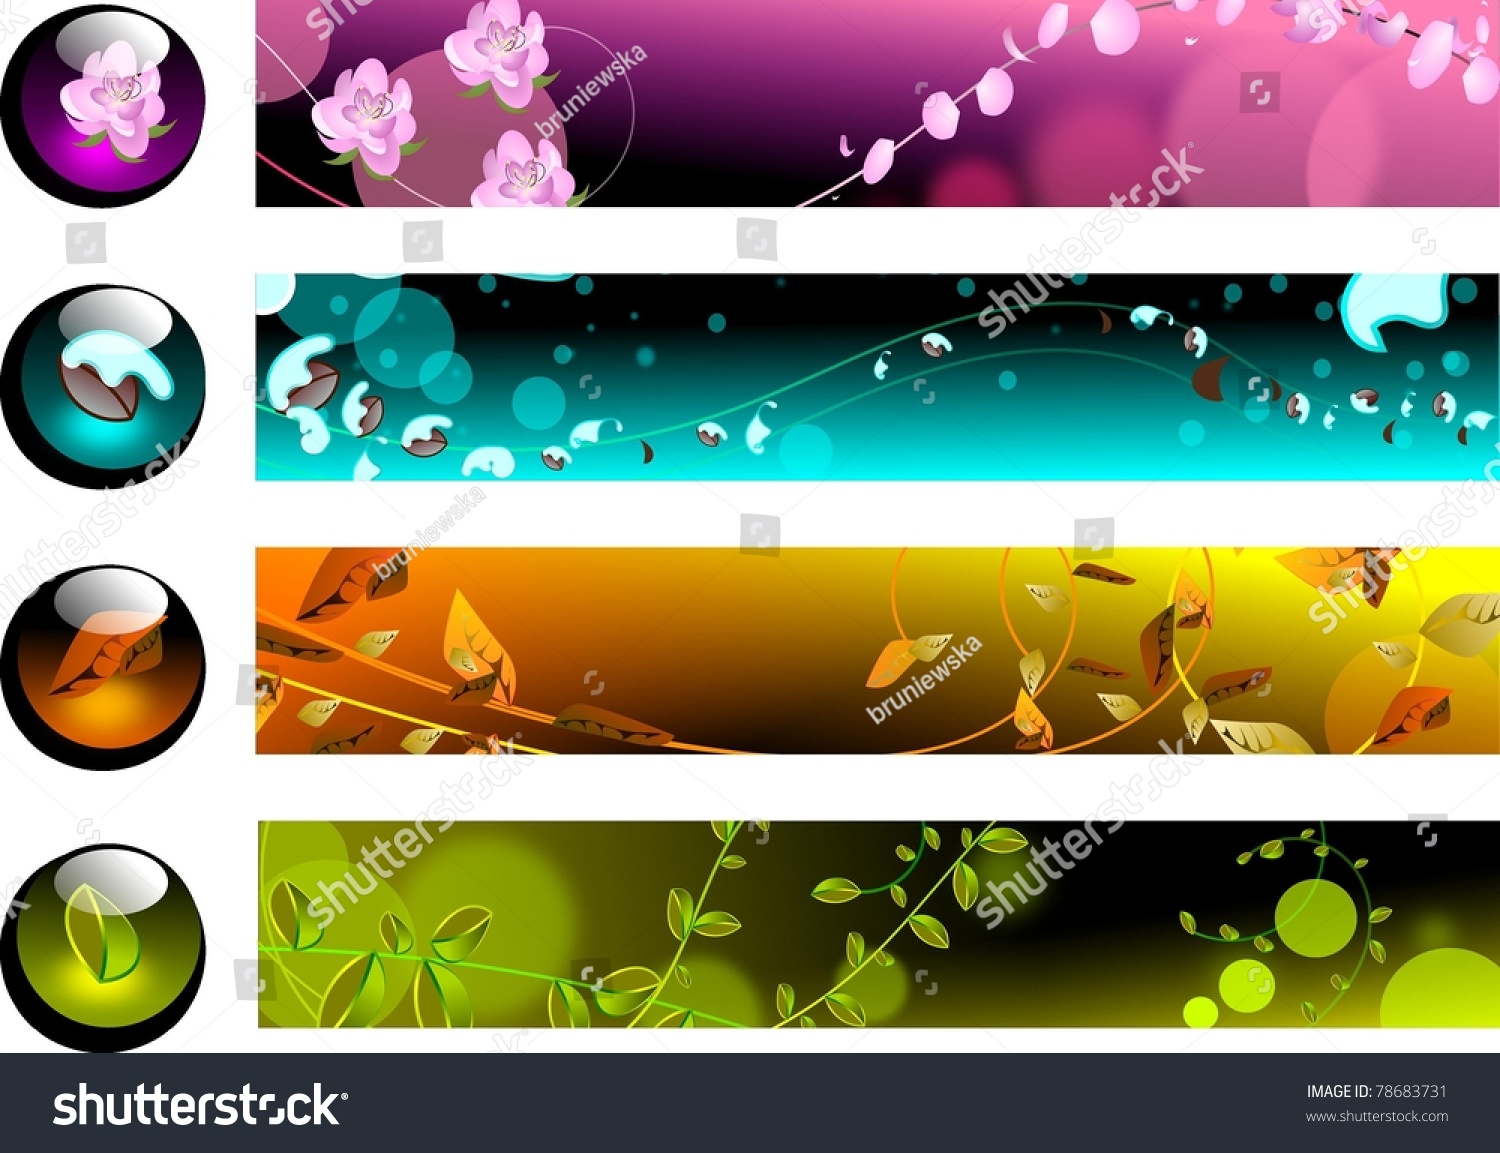 Banners Web Pages About Aesthetic Nice Stock Illustration 78683731